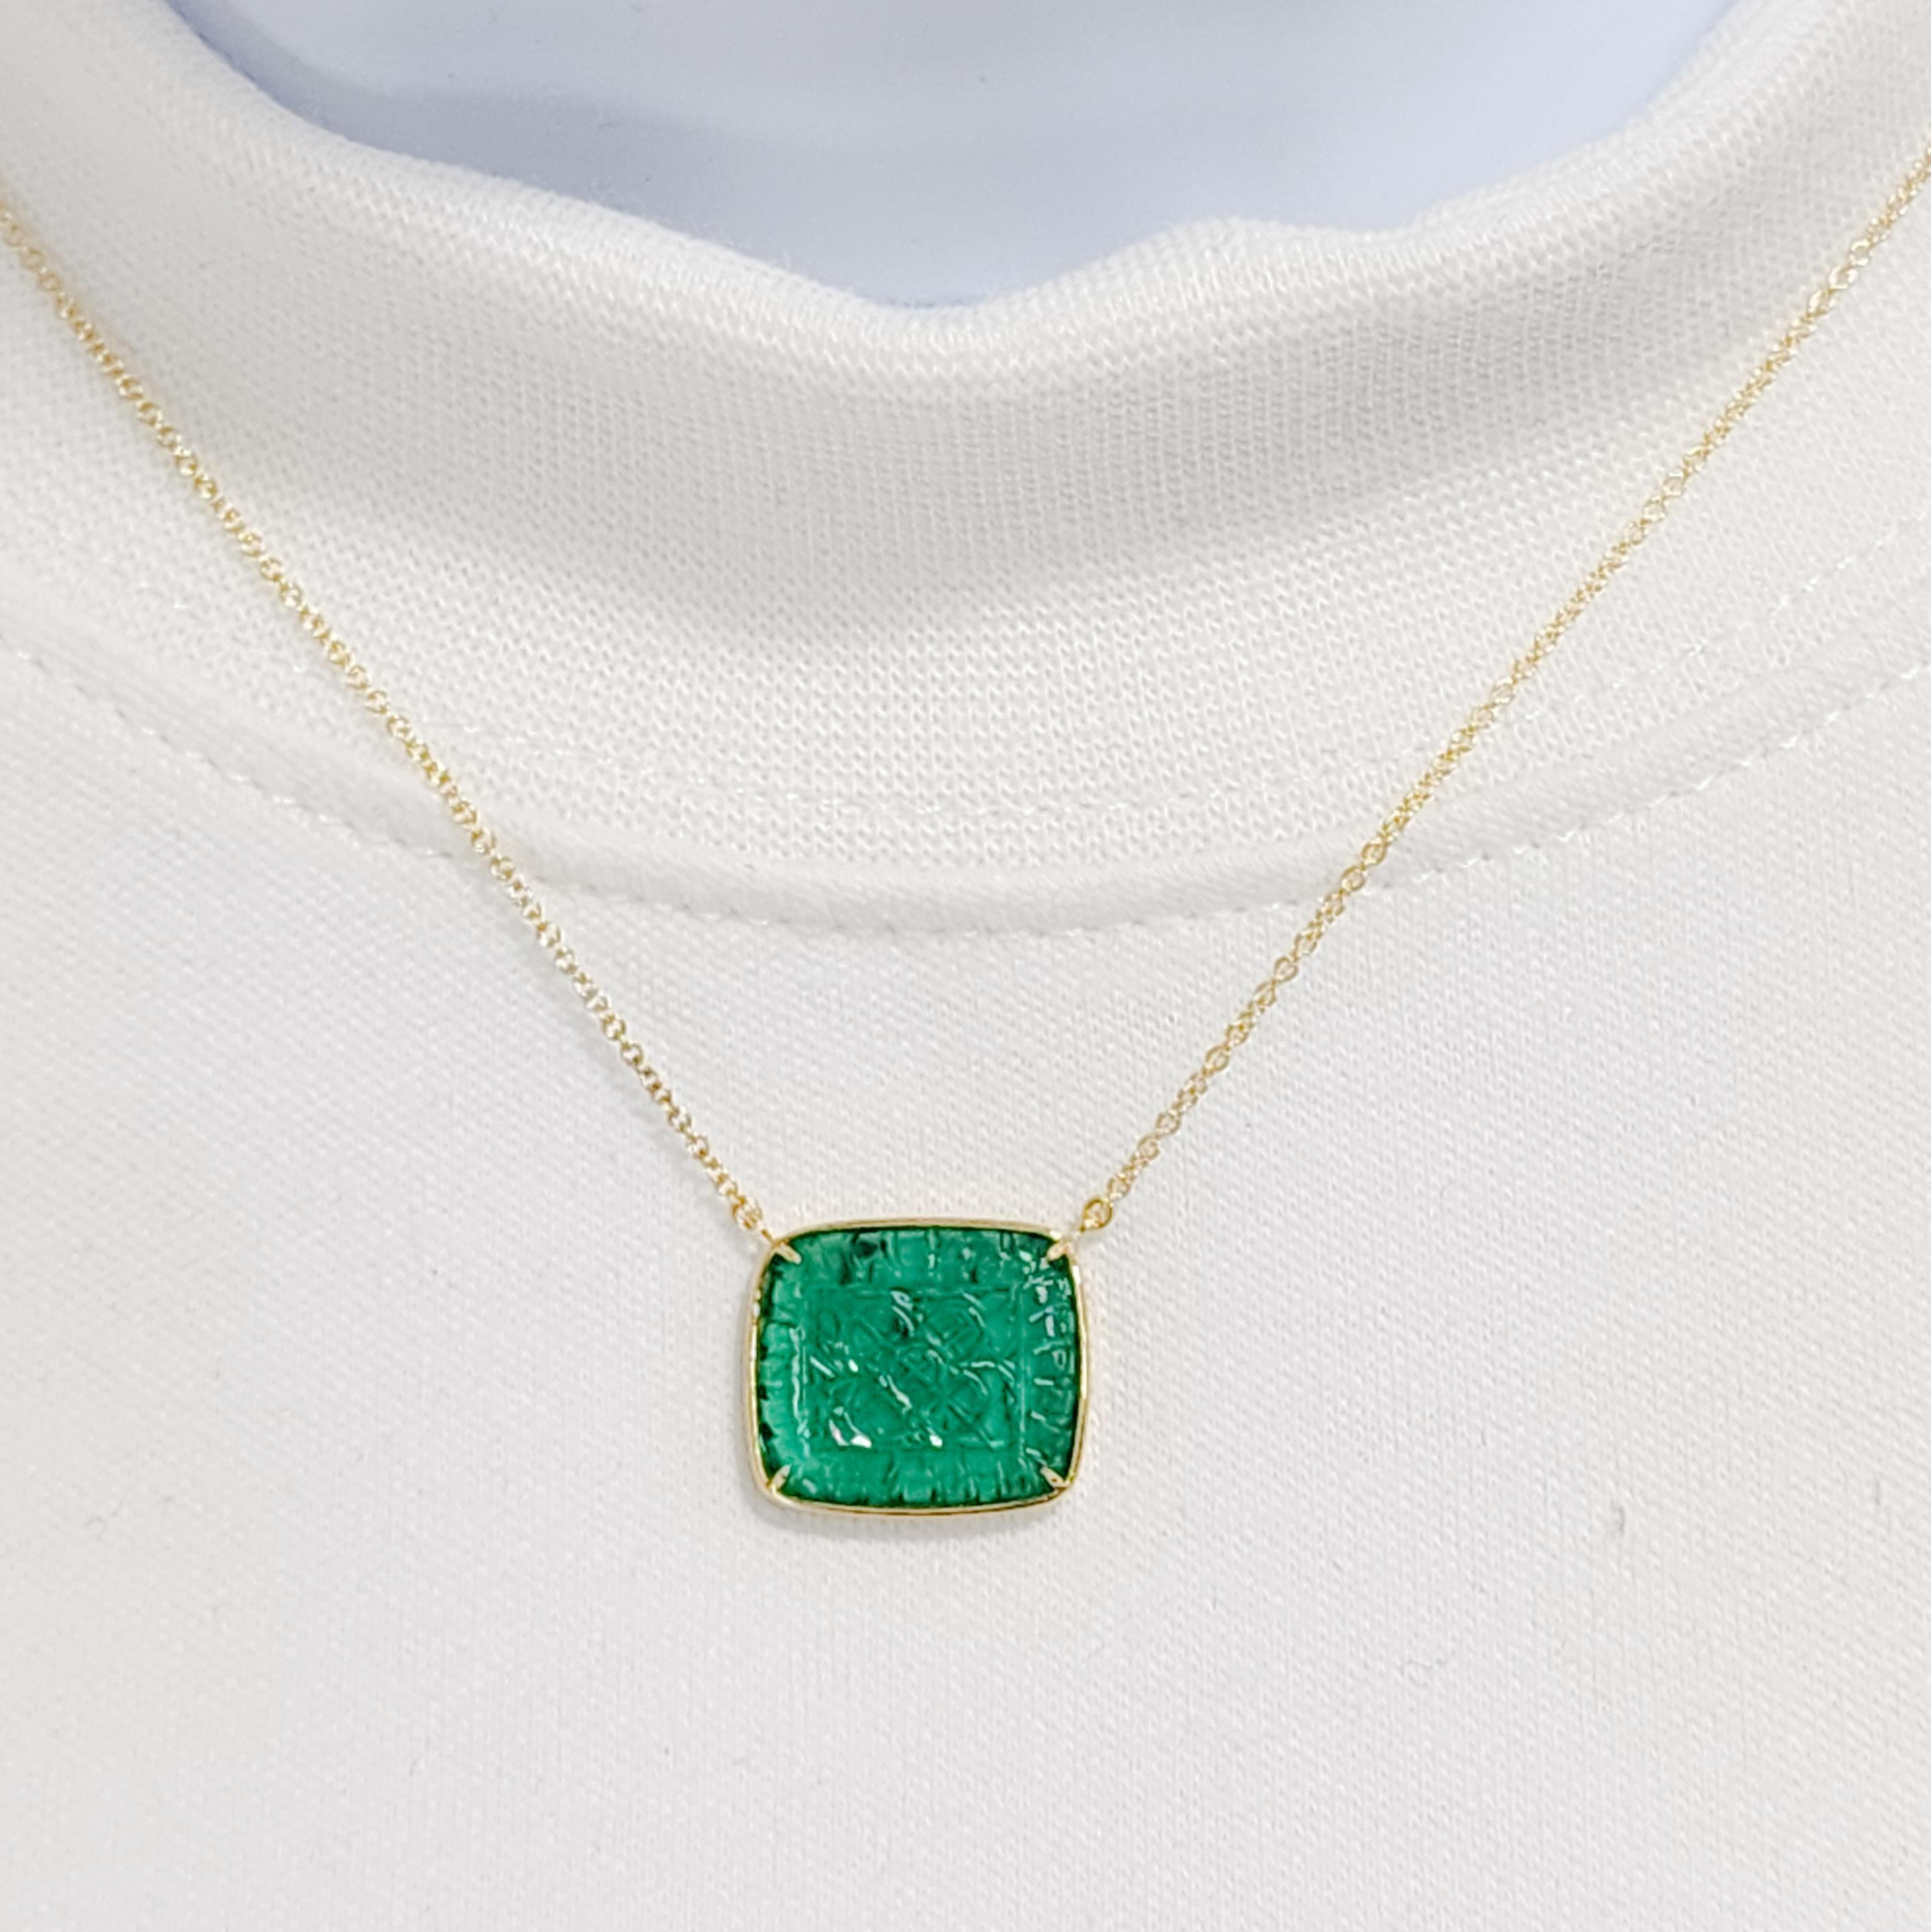 Uncut Carved Emerald Rectangle Pendant Necklace in 18k Yellow Gold